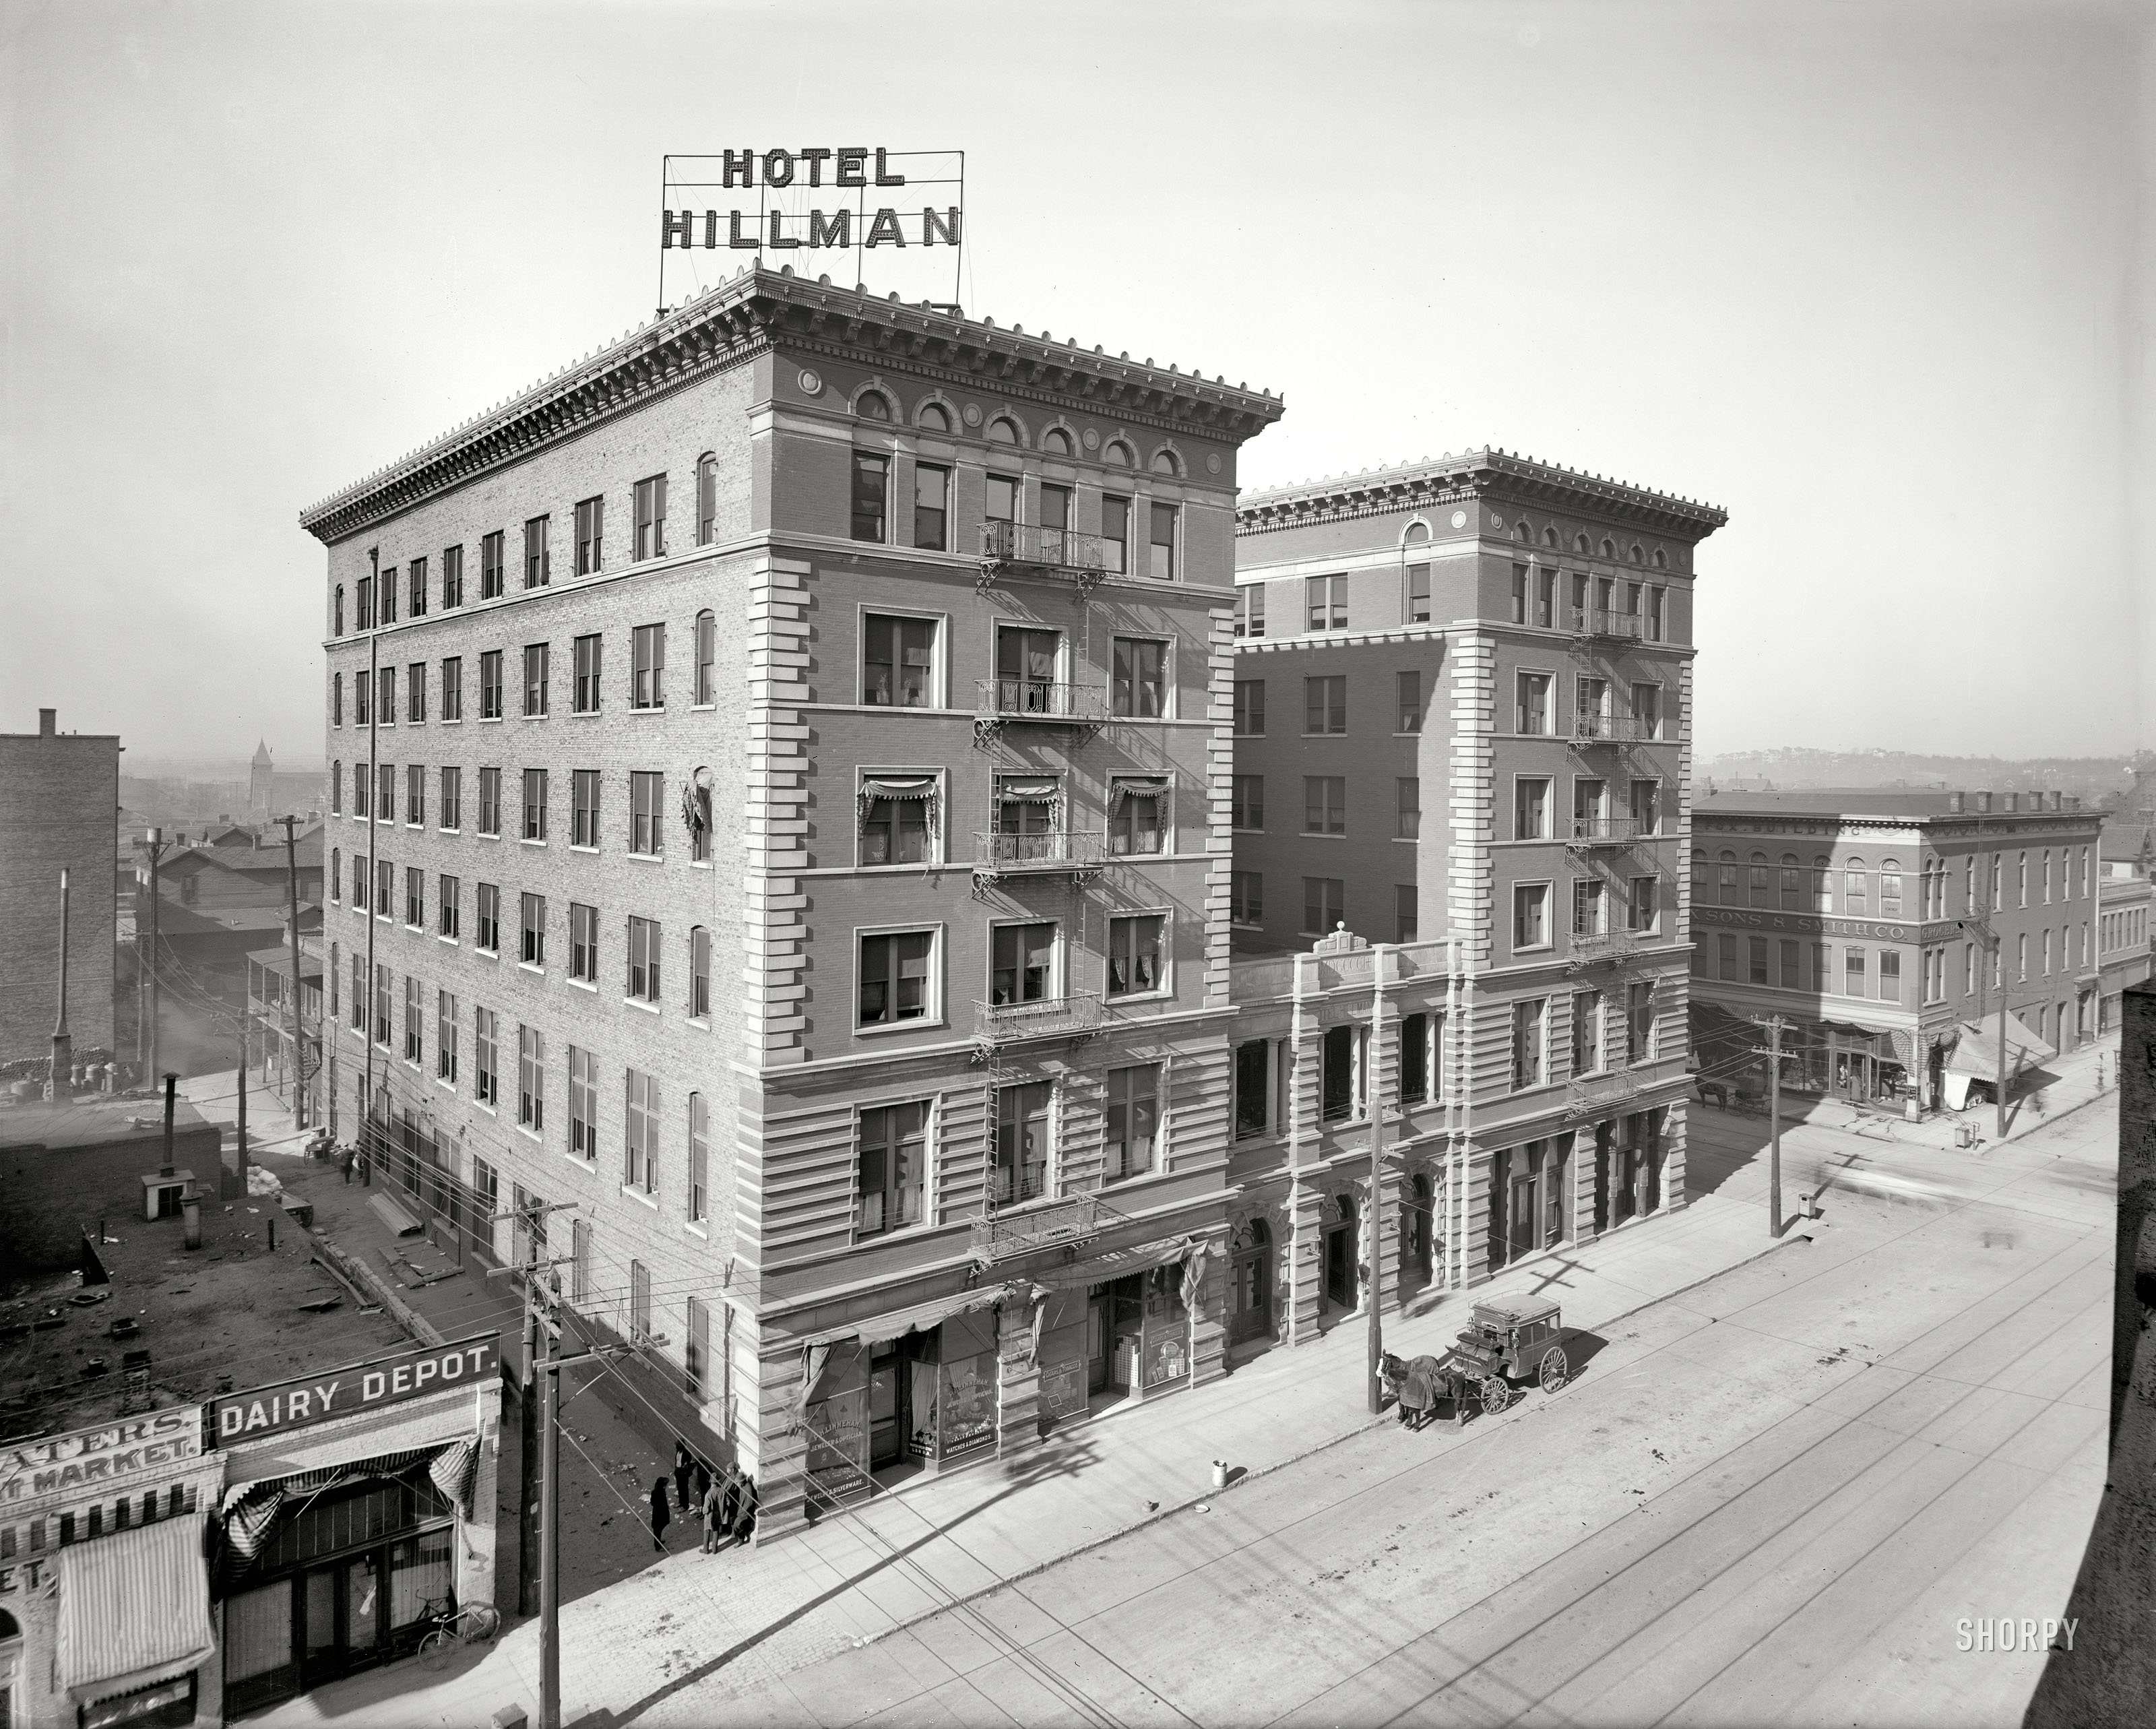 Birmingham, Alabama, circa 1906. "Hotel Hillman." And the Dairy Depot next door. 8x10 inch dry plate glass negative, Detroit Publishing Co. View full size.